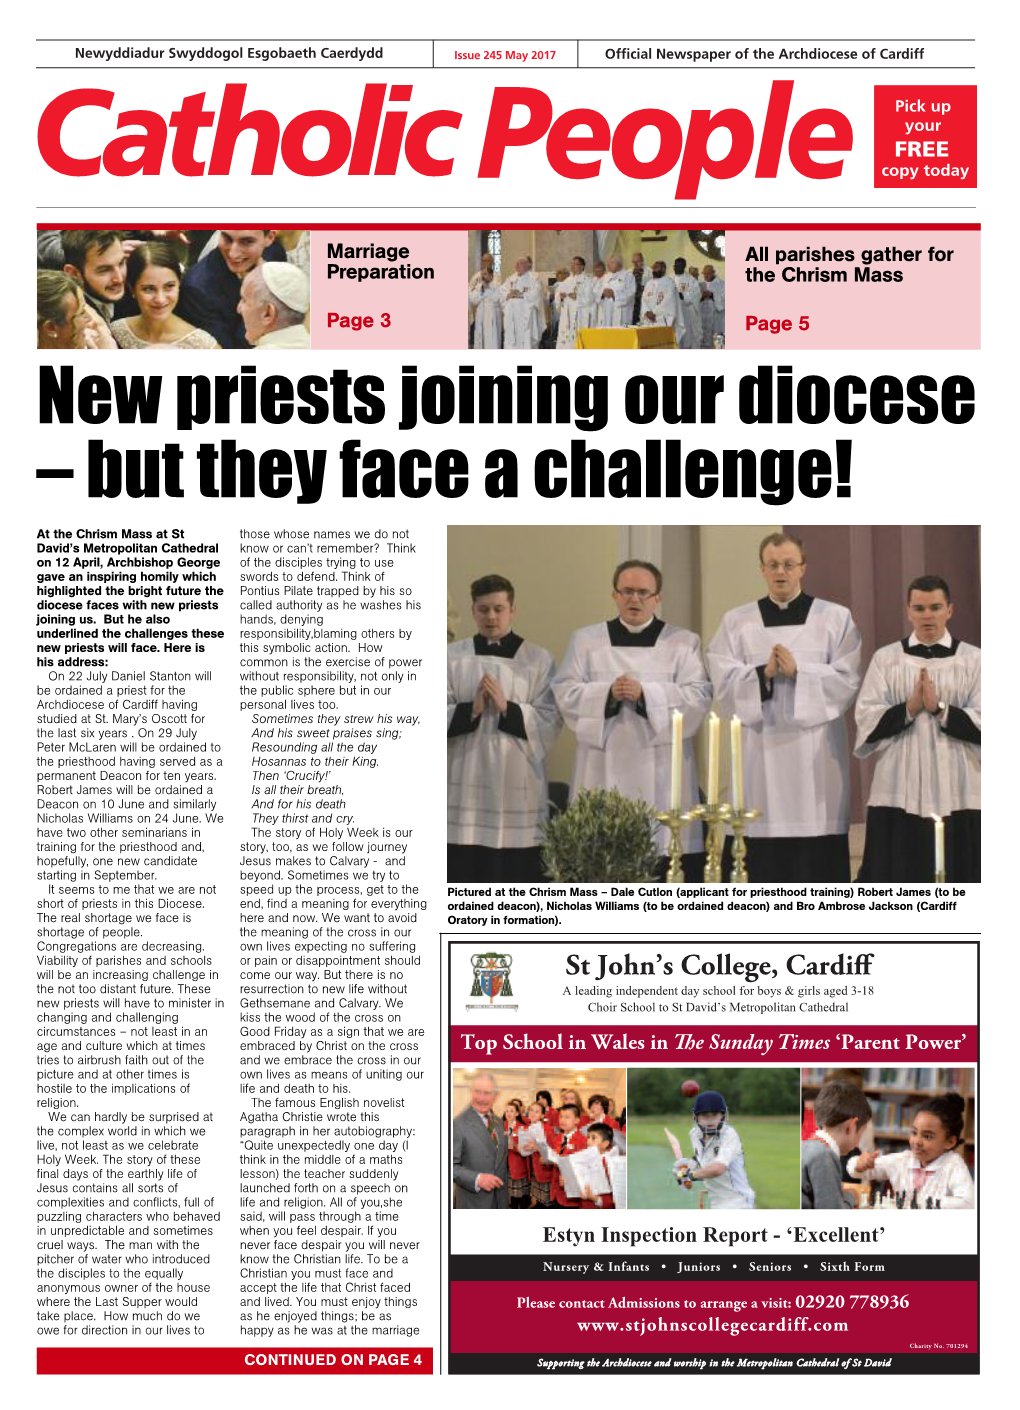 New Priests Joining Our Diocese – but They Face a Challenge! CONTINUED from FRONT PAGE